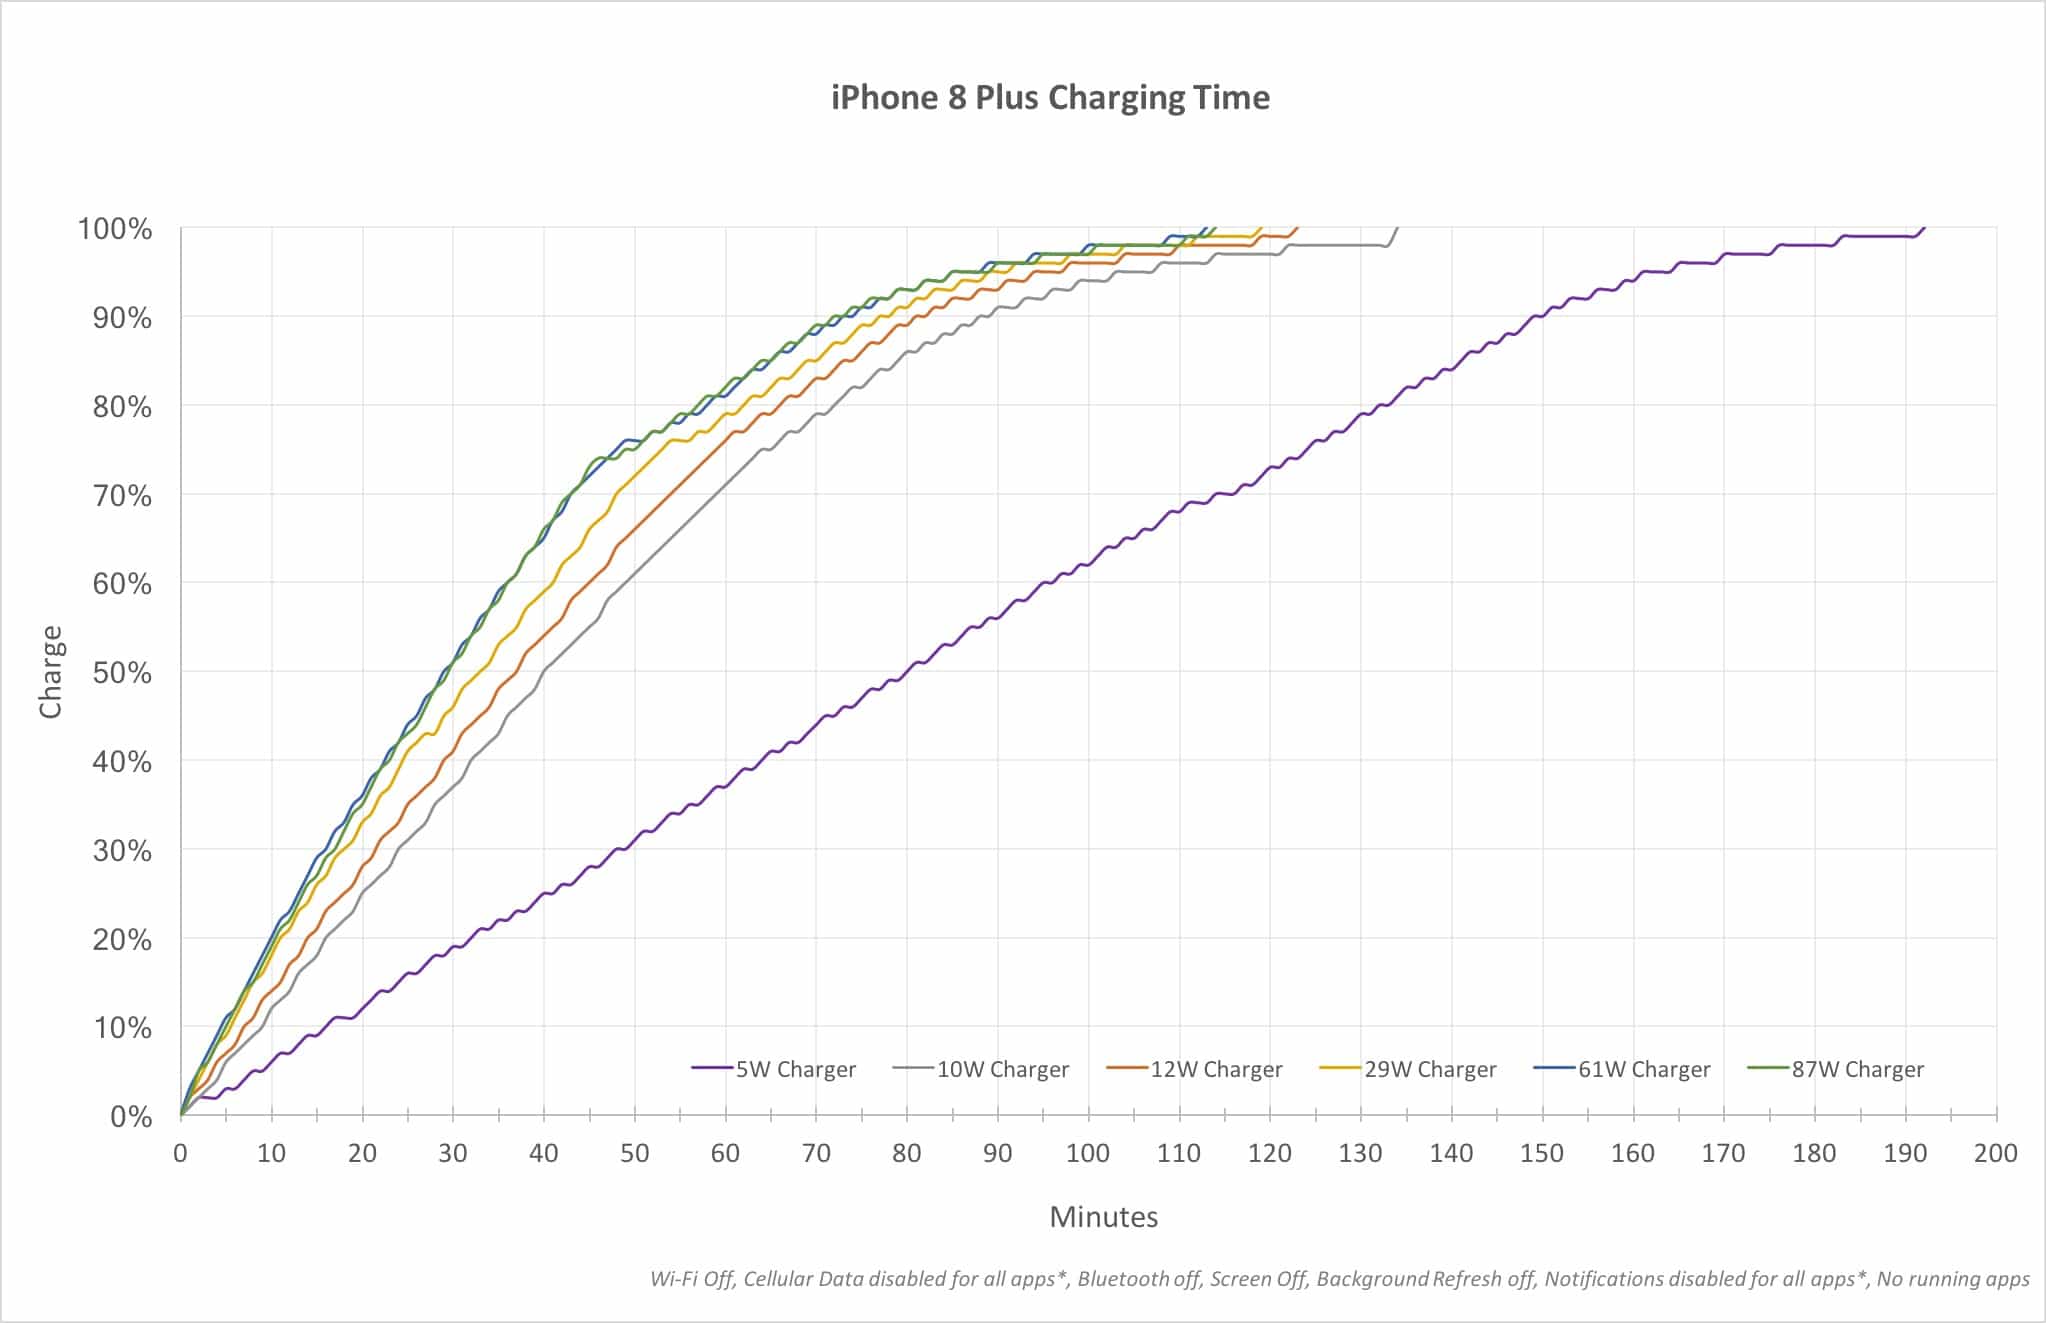 Everything is faster than the little iPhone charger.